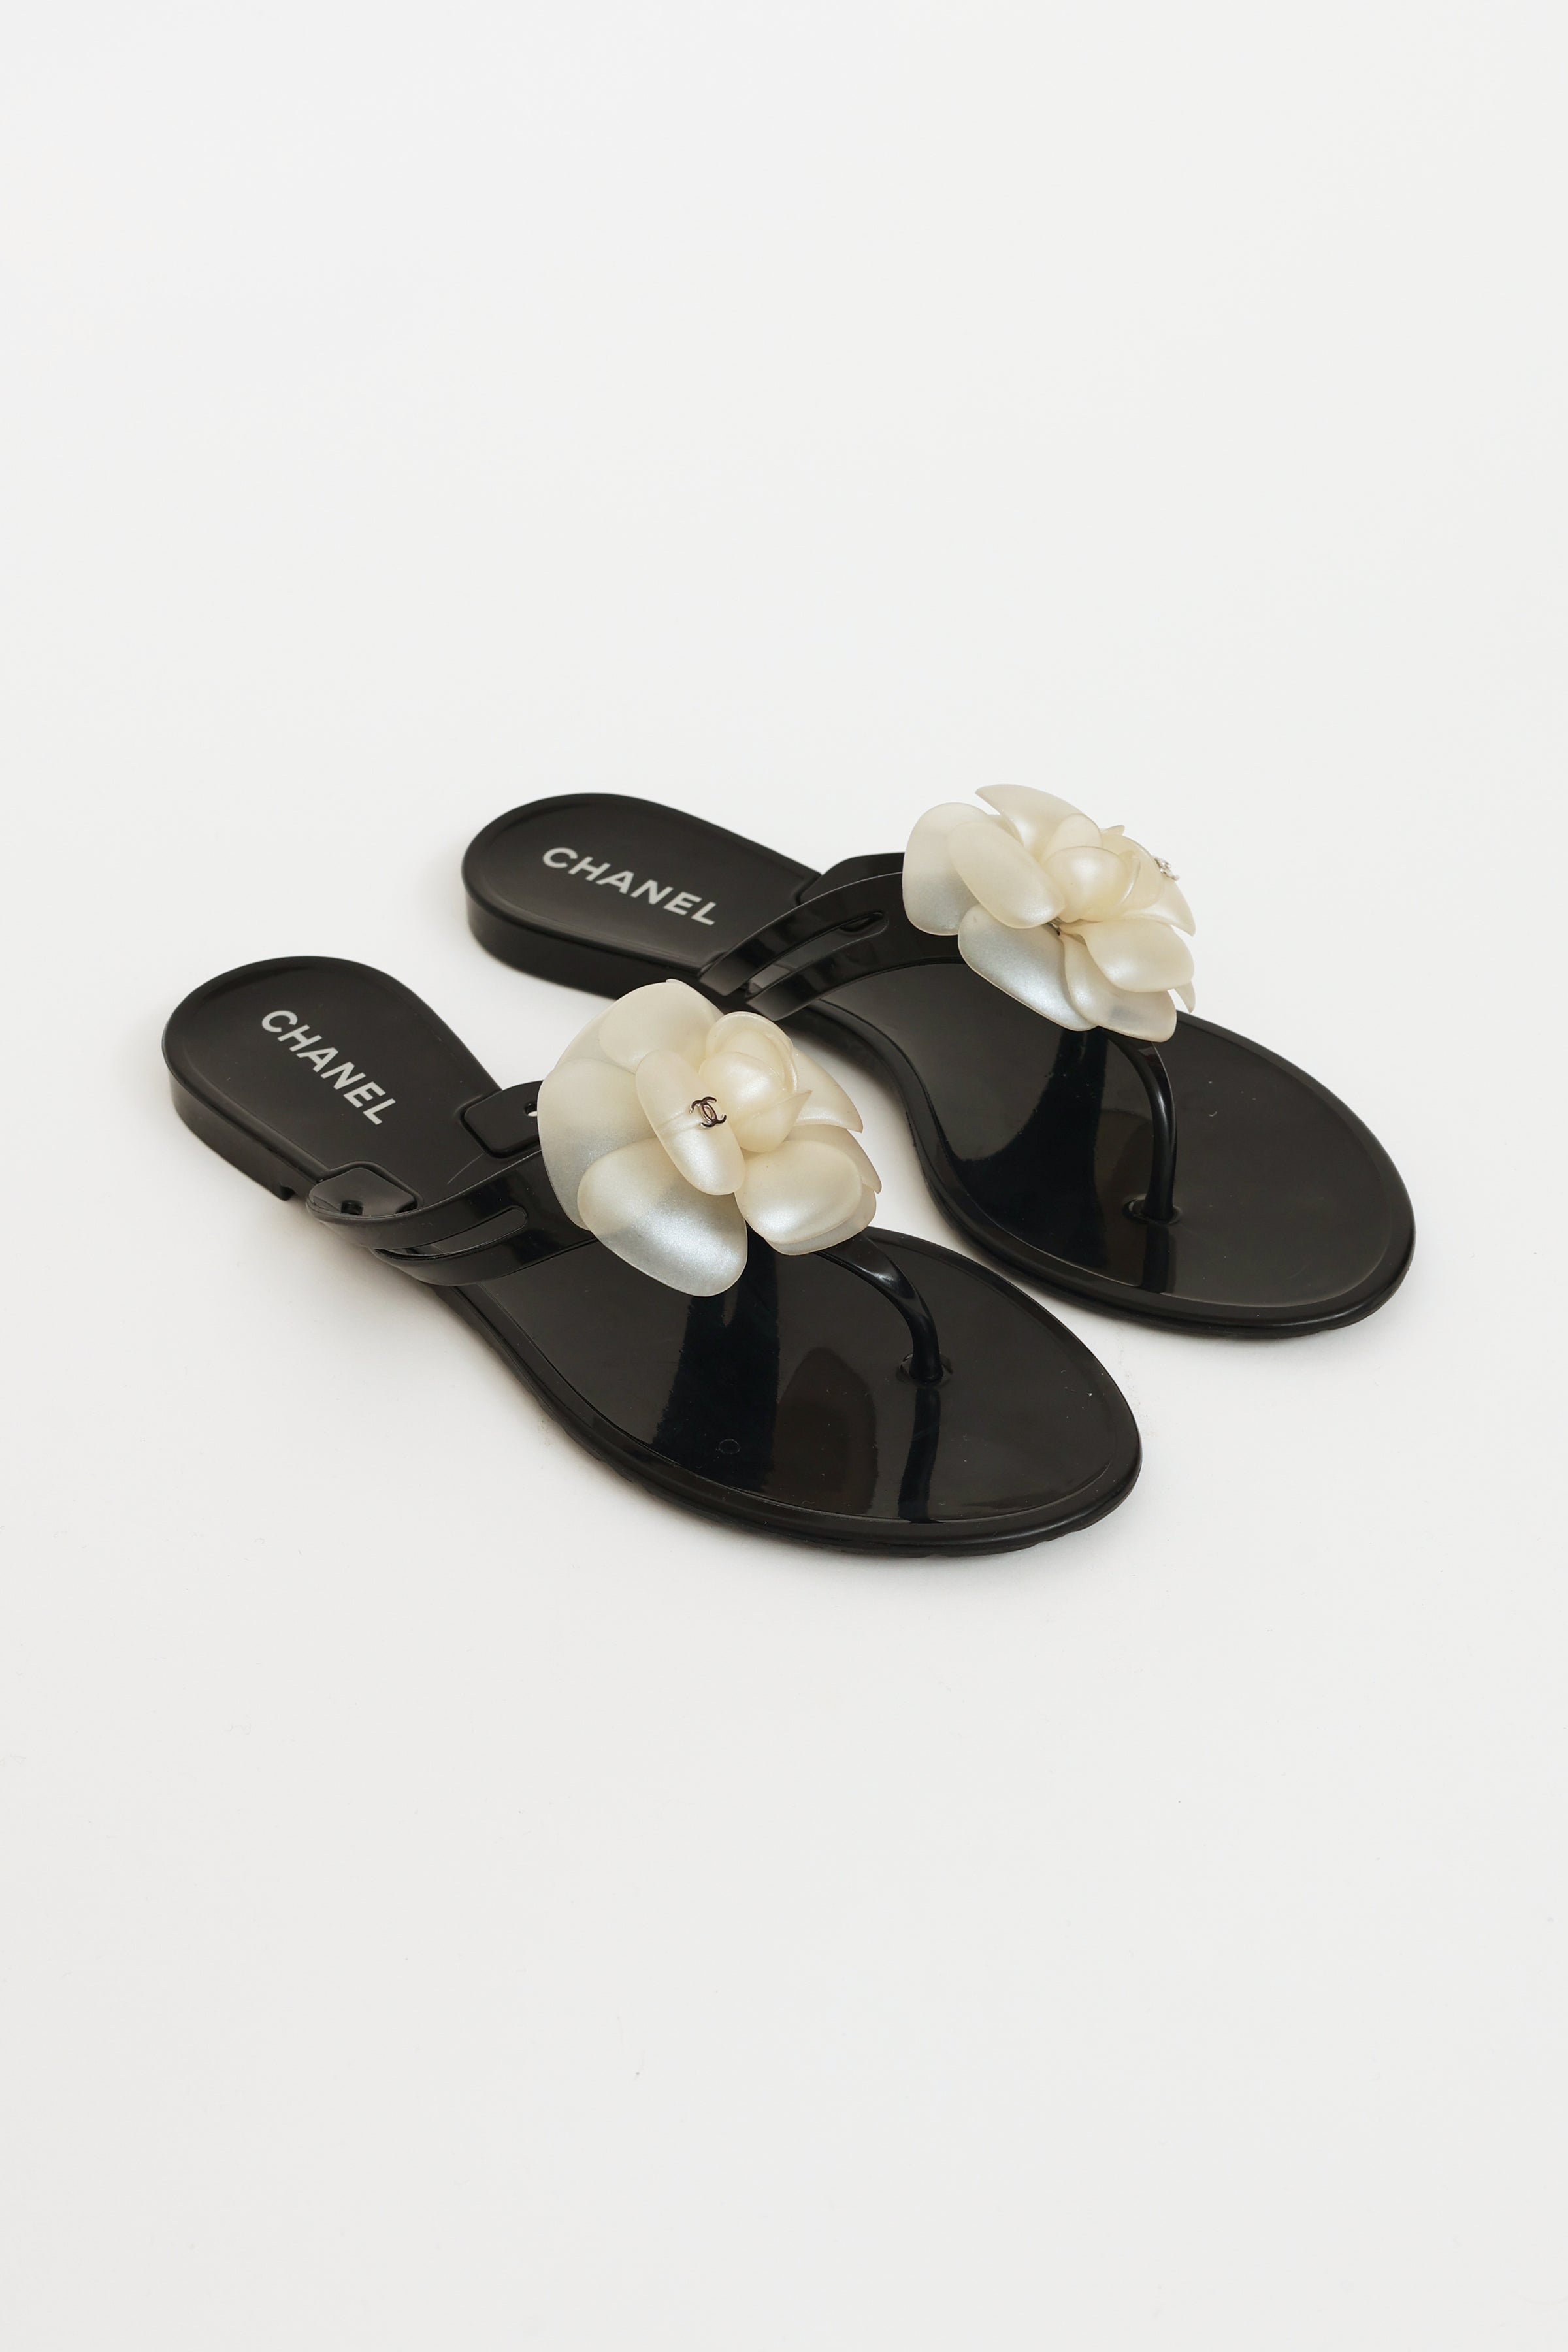 CHANEL Jelly Camellia Thong Sandals 35 Ivory Black 1259936